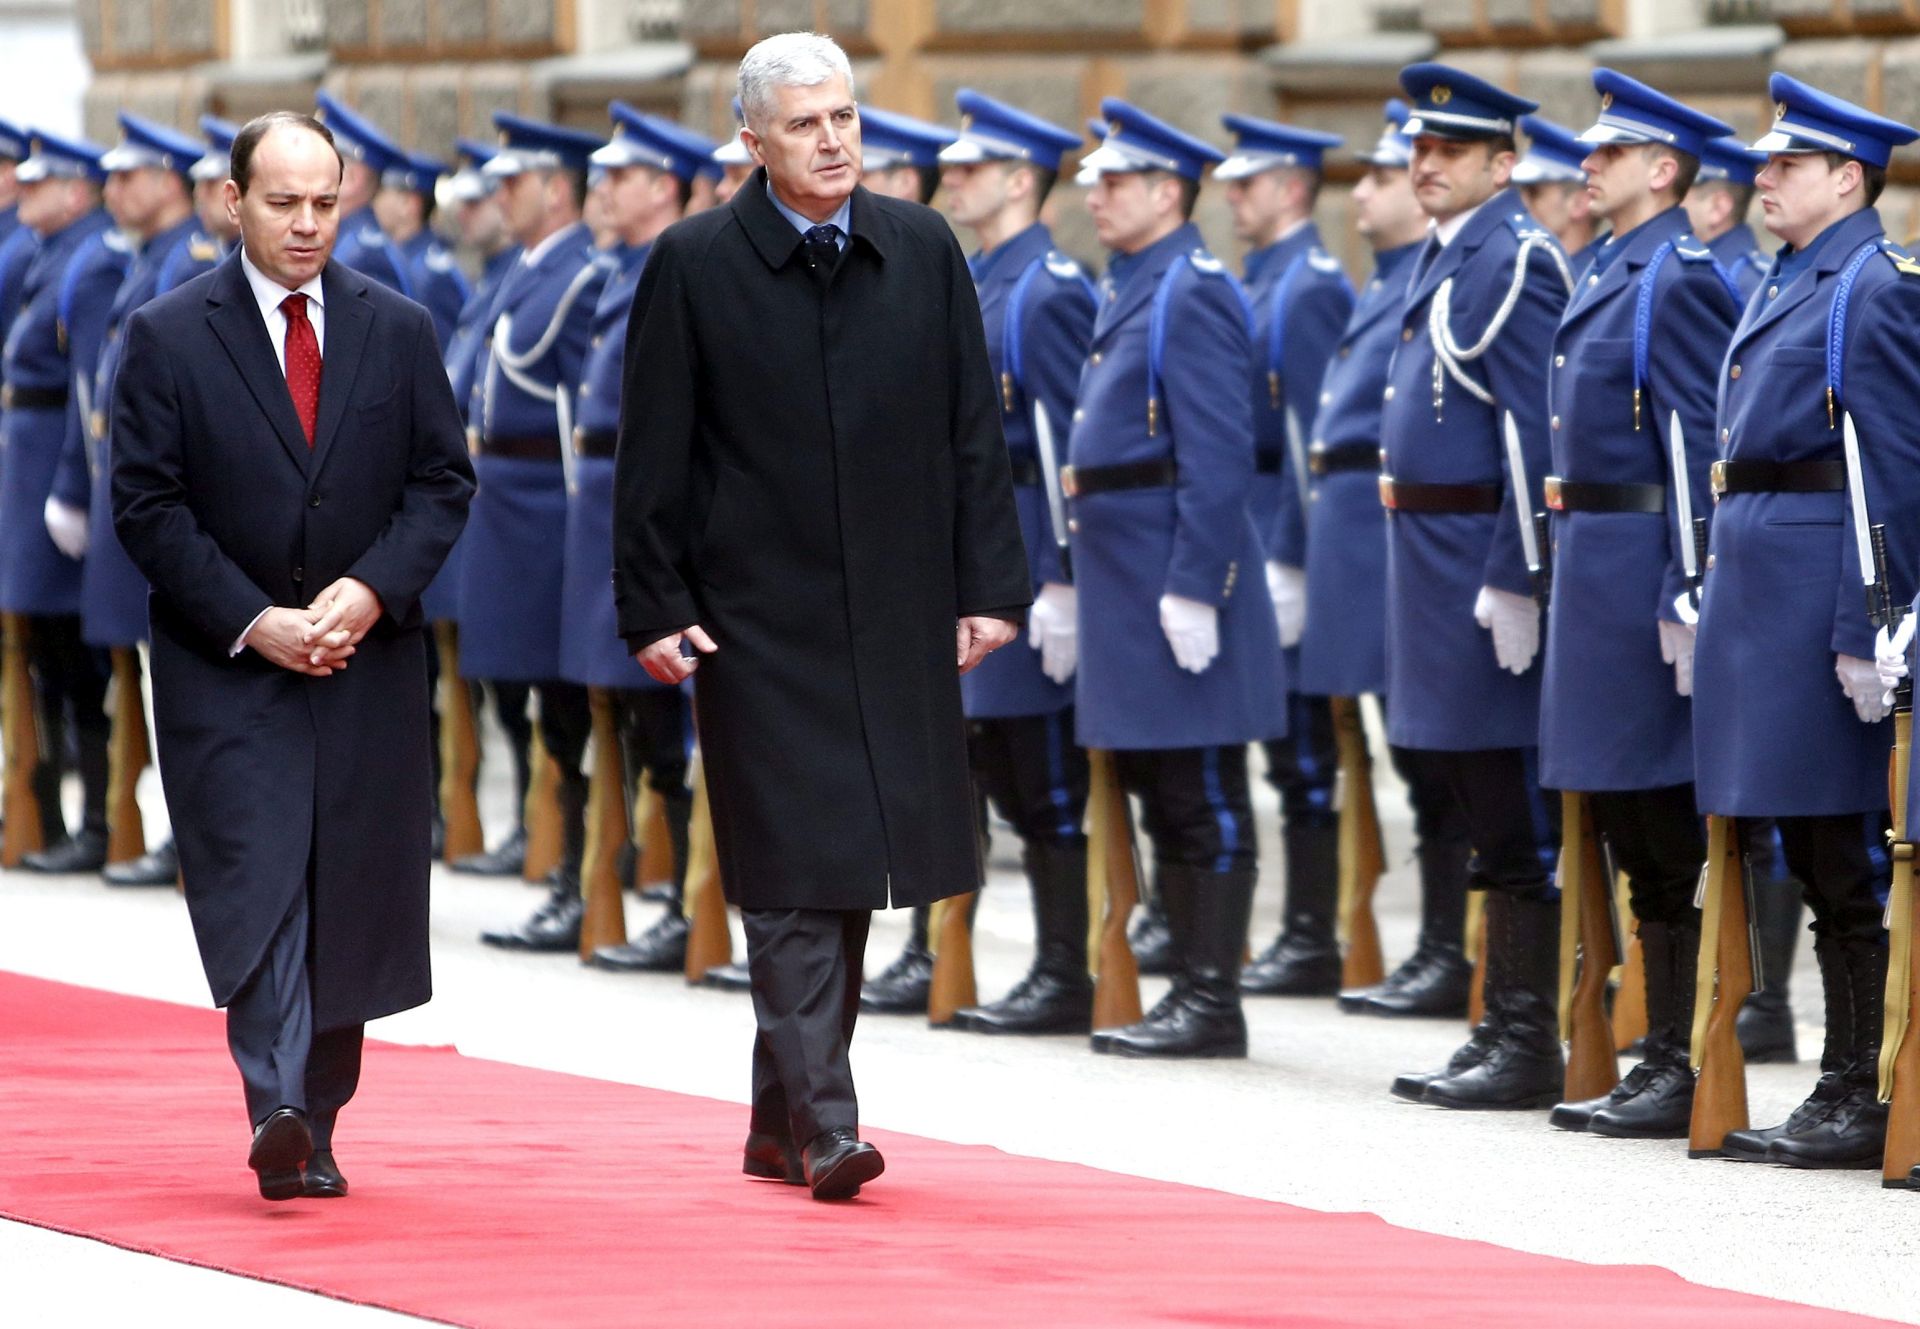 epa05177979 Albanian President Bujar Nishani (L) and Chairman of the Presidency of Bosnia and Herzegovina Dragan Covic (R) review the honor guard during a welcoming ceremony in Sarajevo, Bosnia and Herzegovina, 24 February 2016. Nishani is on an official visit to strengthen bilateral ties.  EPA/FEHIM DEMIR